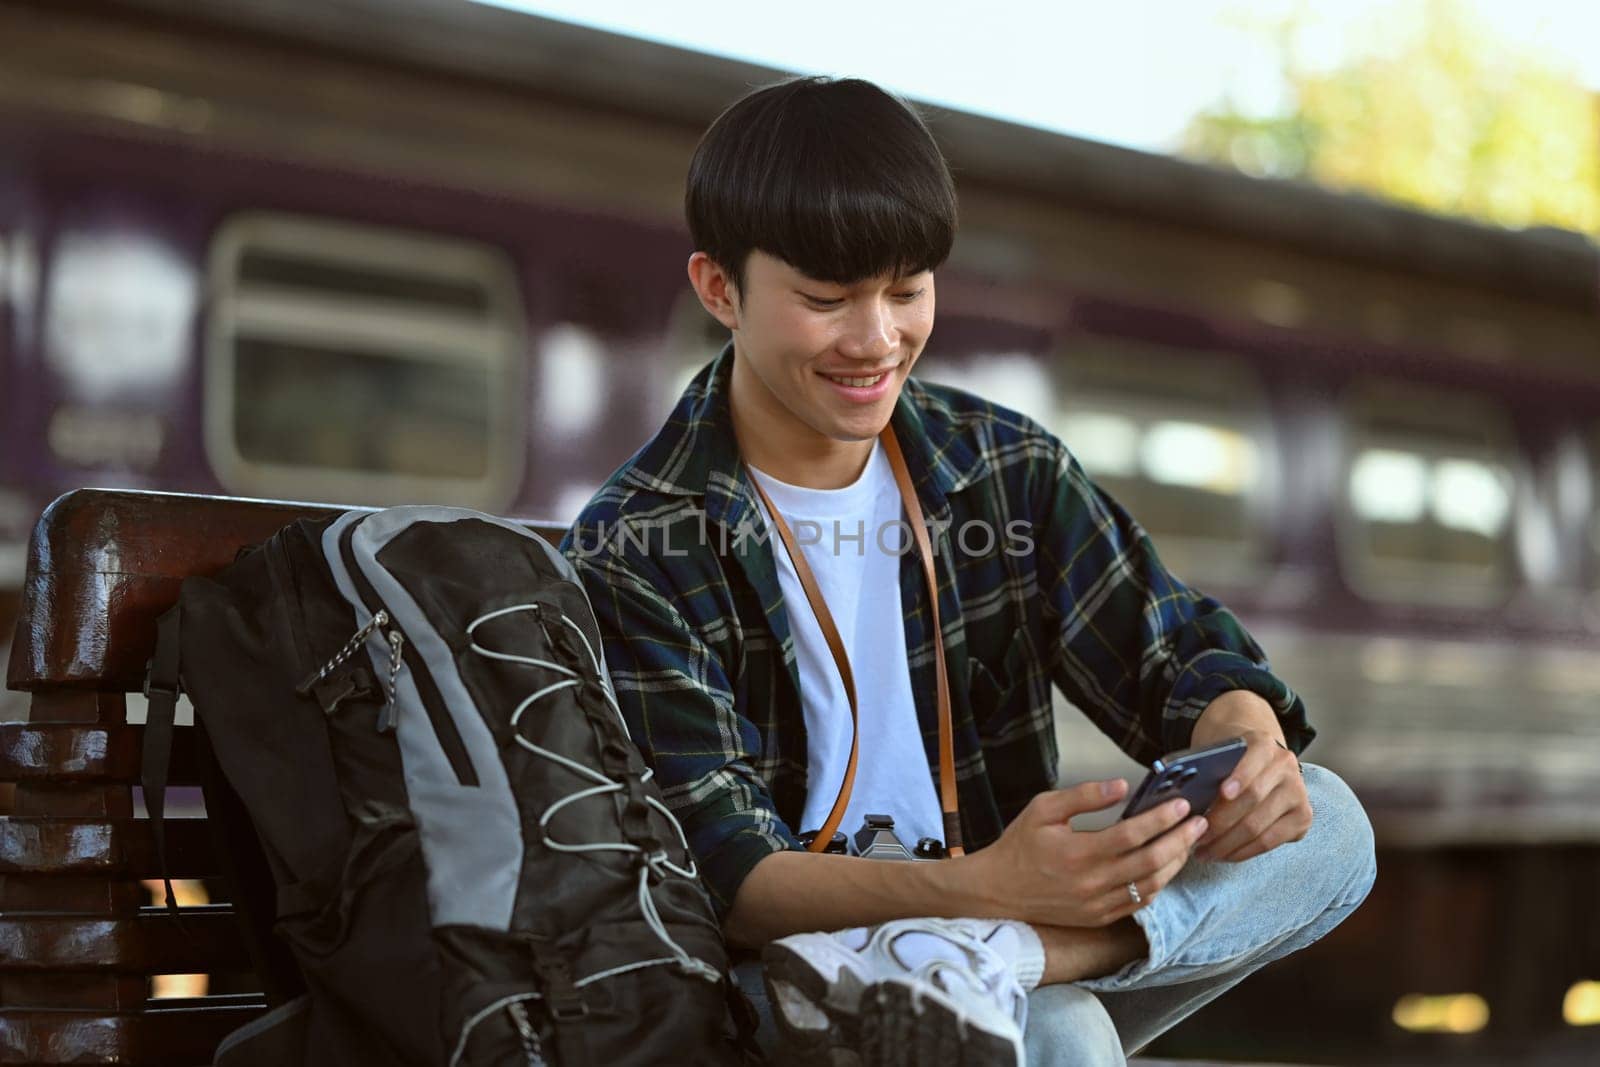 Smiling Asian male sitting on bench waiting for train and using mobile phone. Travel and lifestyle concept by prathanchorruangsak